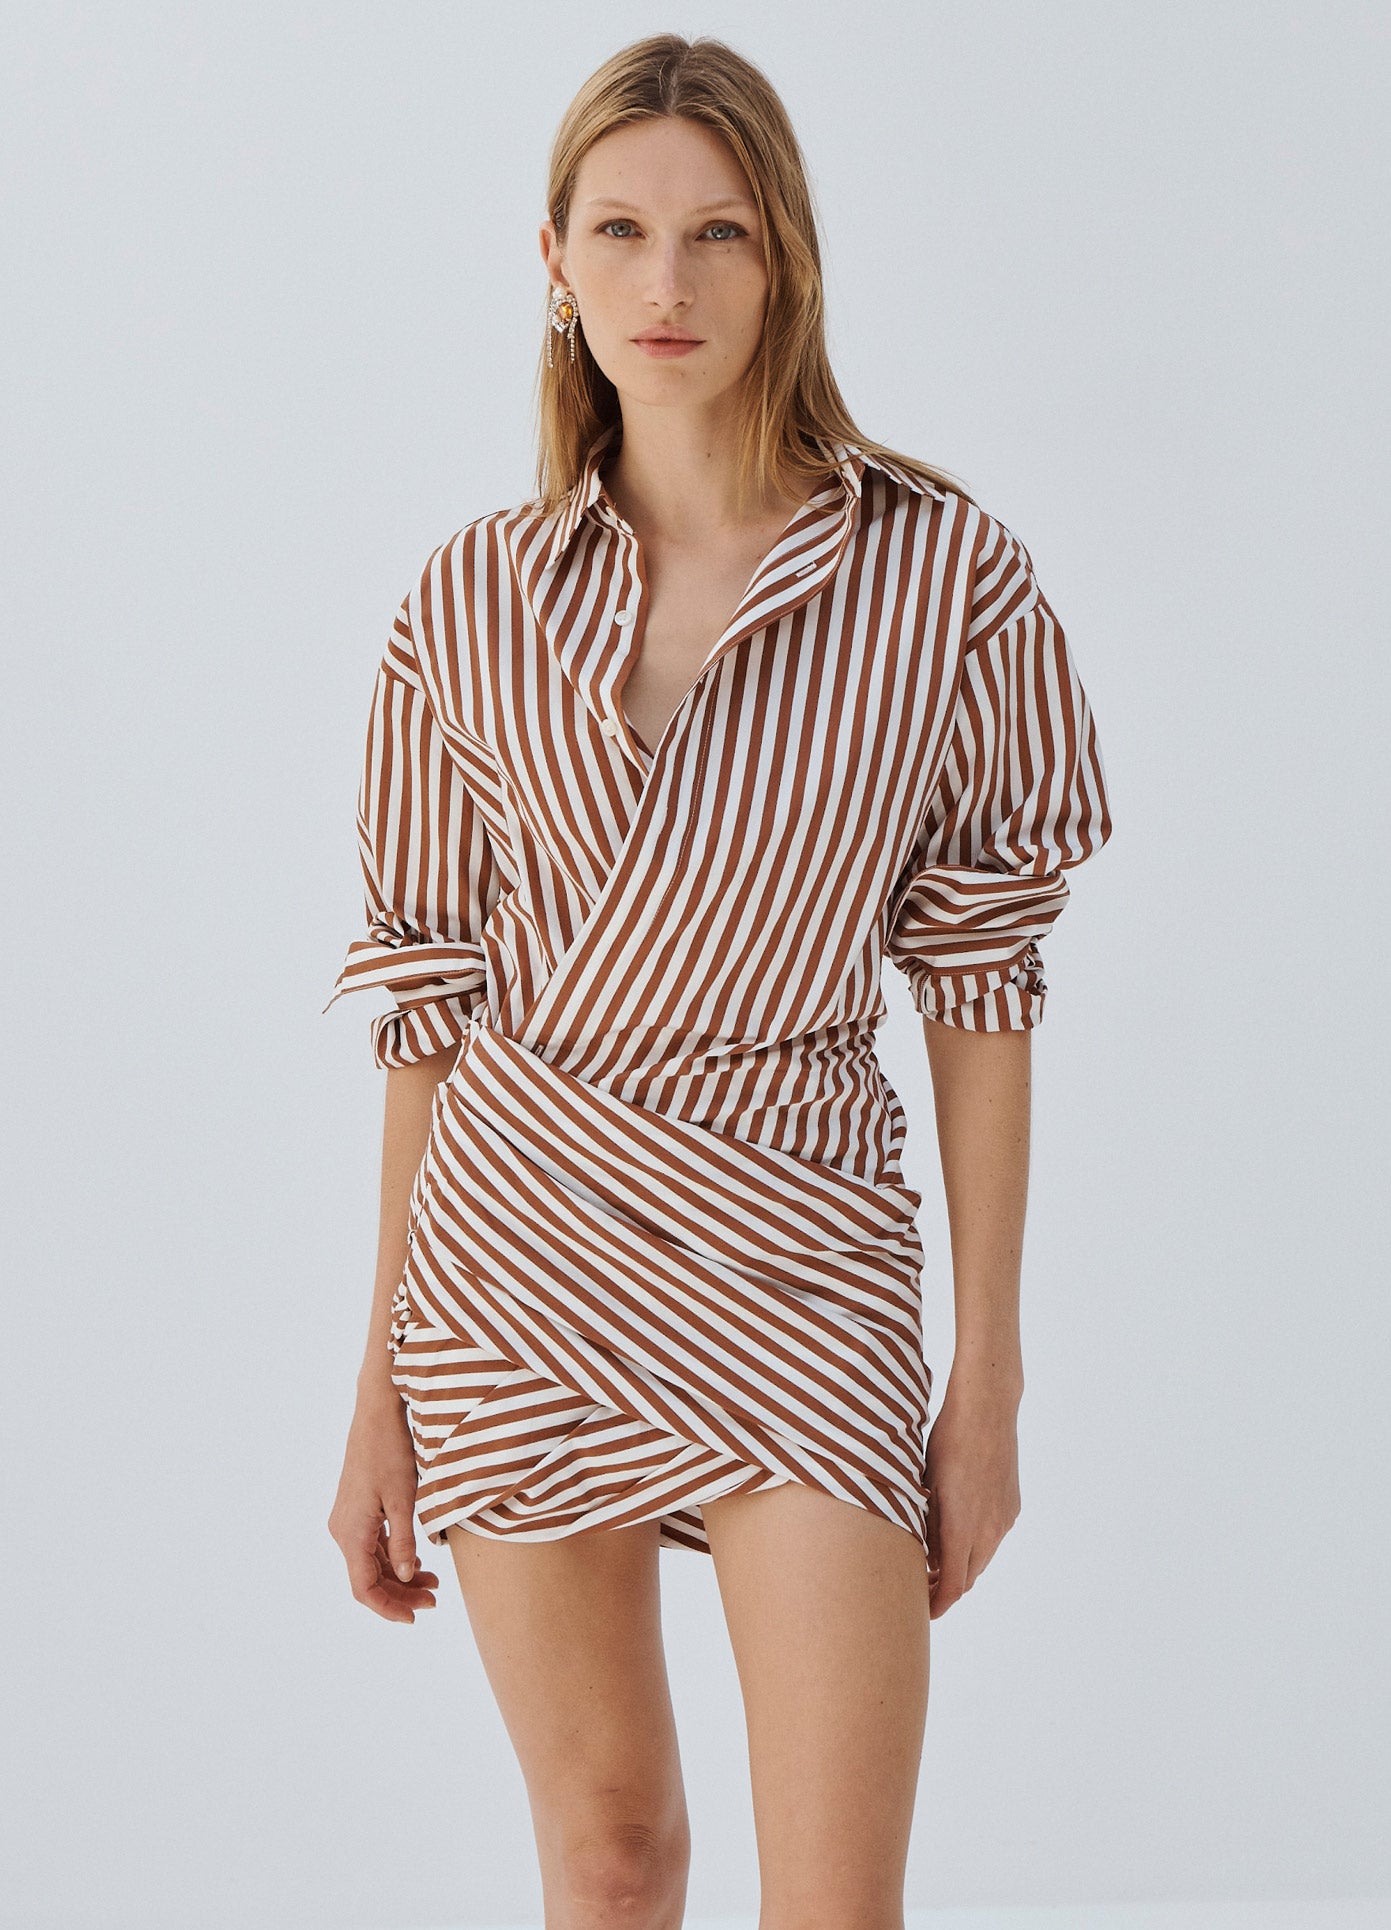 MONSE Striped Wrap Shirt Dress in Brown and Ivory on Model Front View